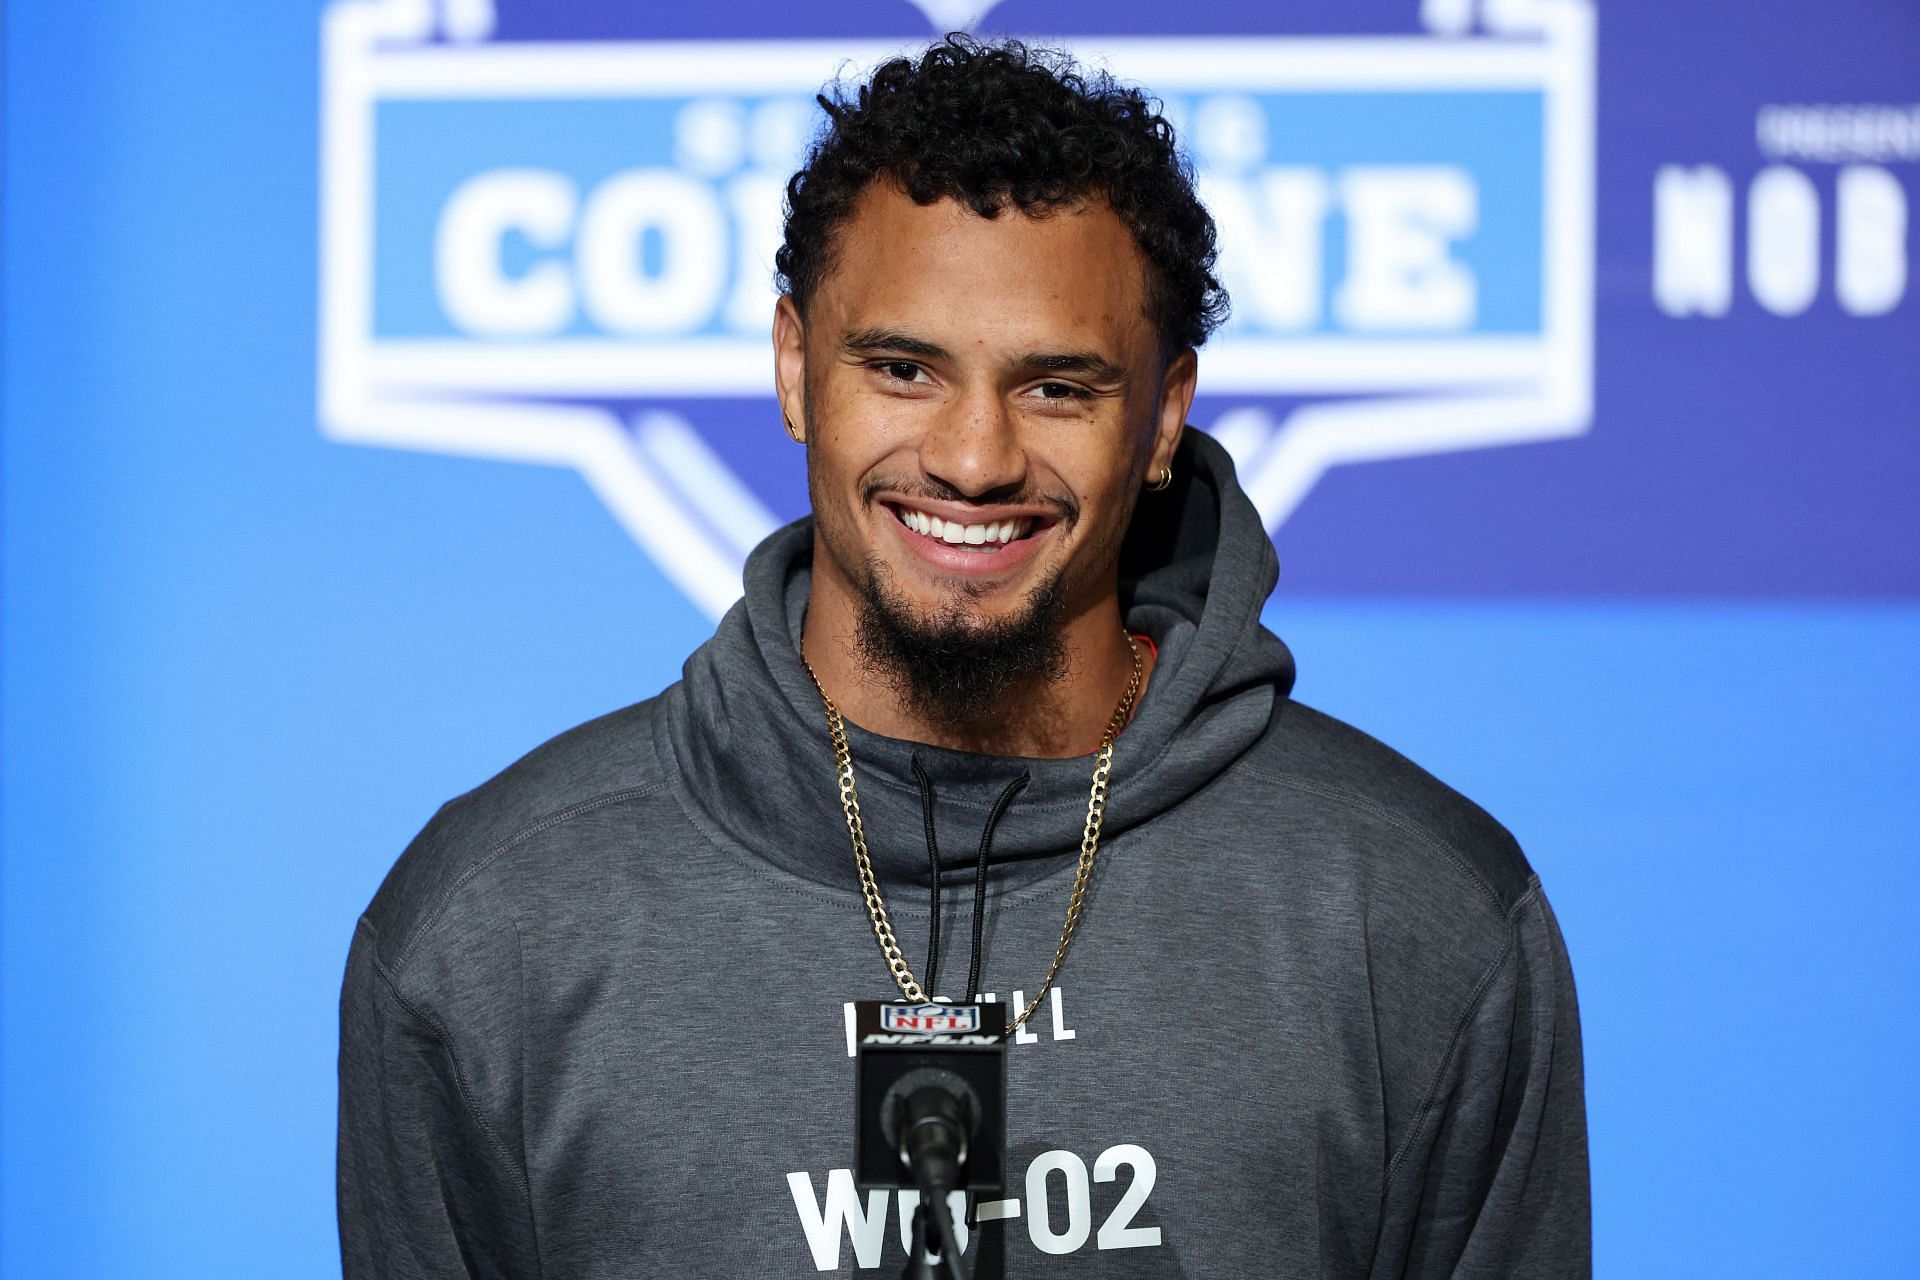 Ronnie Bell at the 2023 NFL Combine